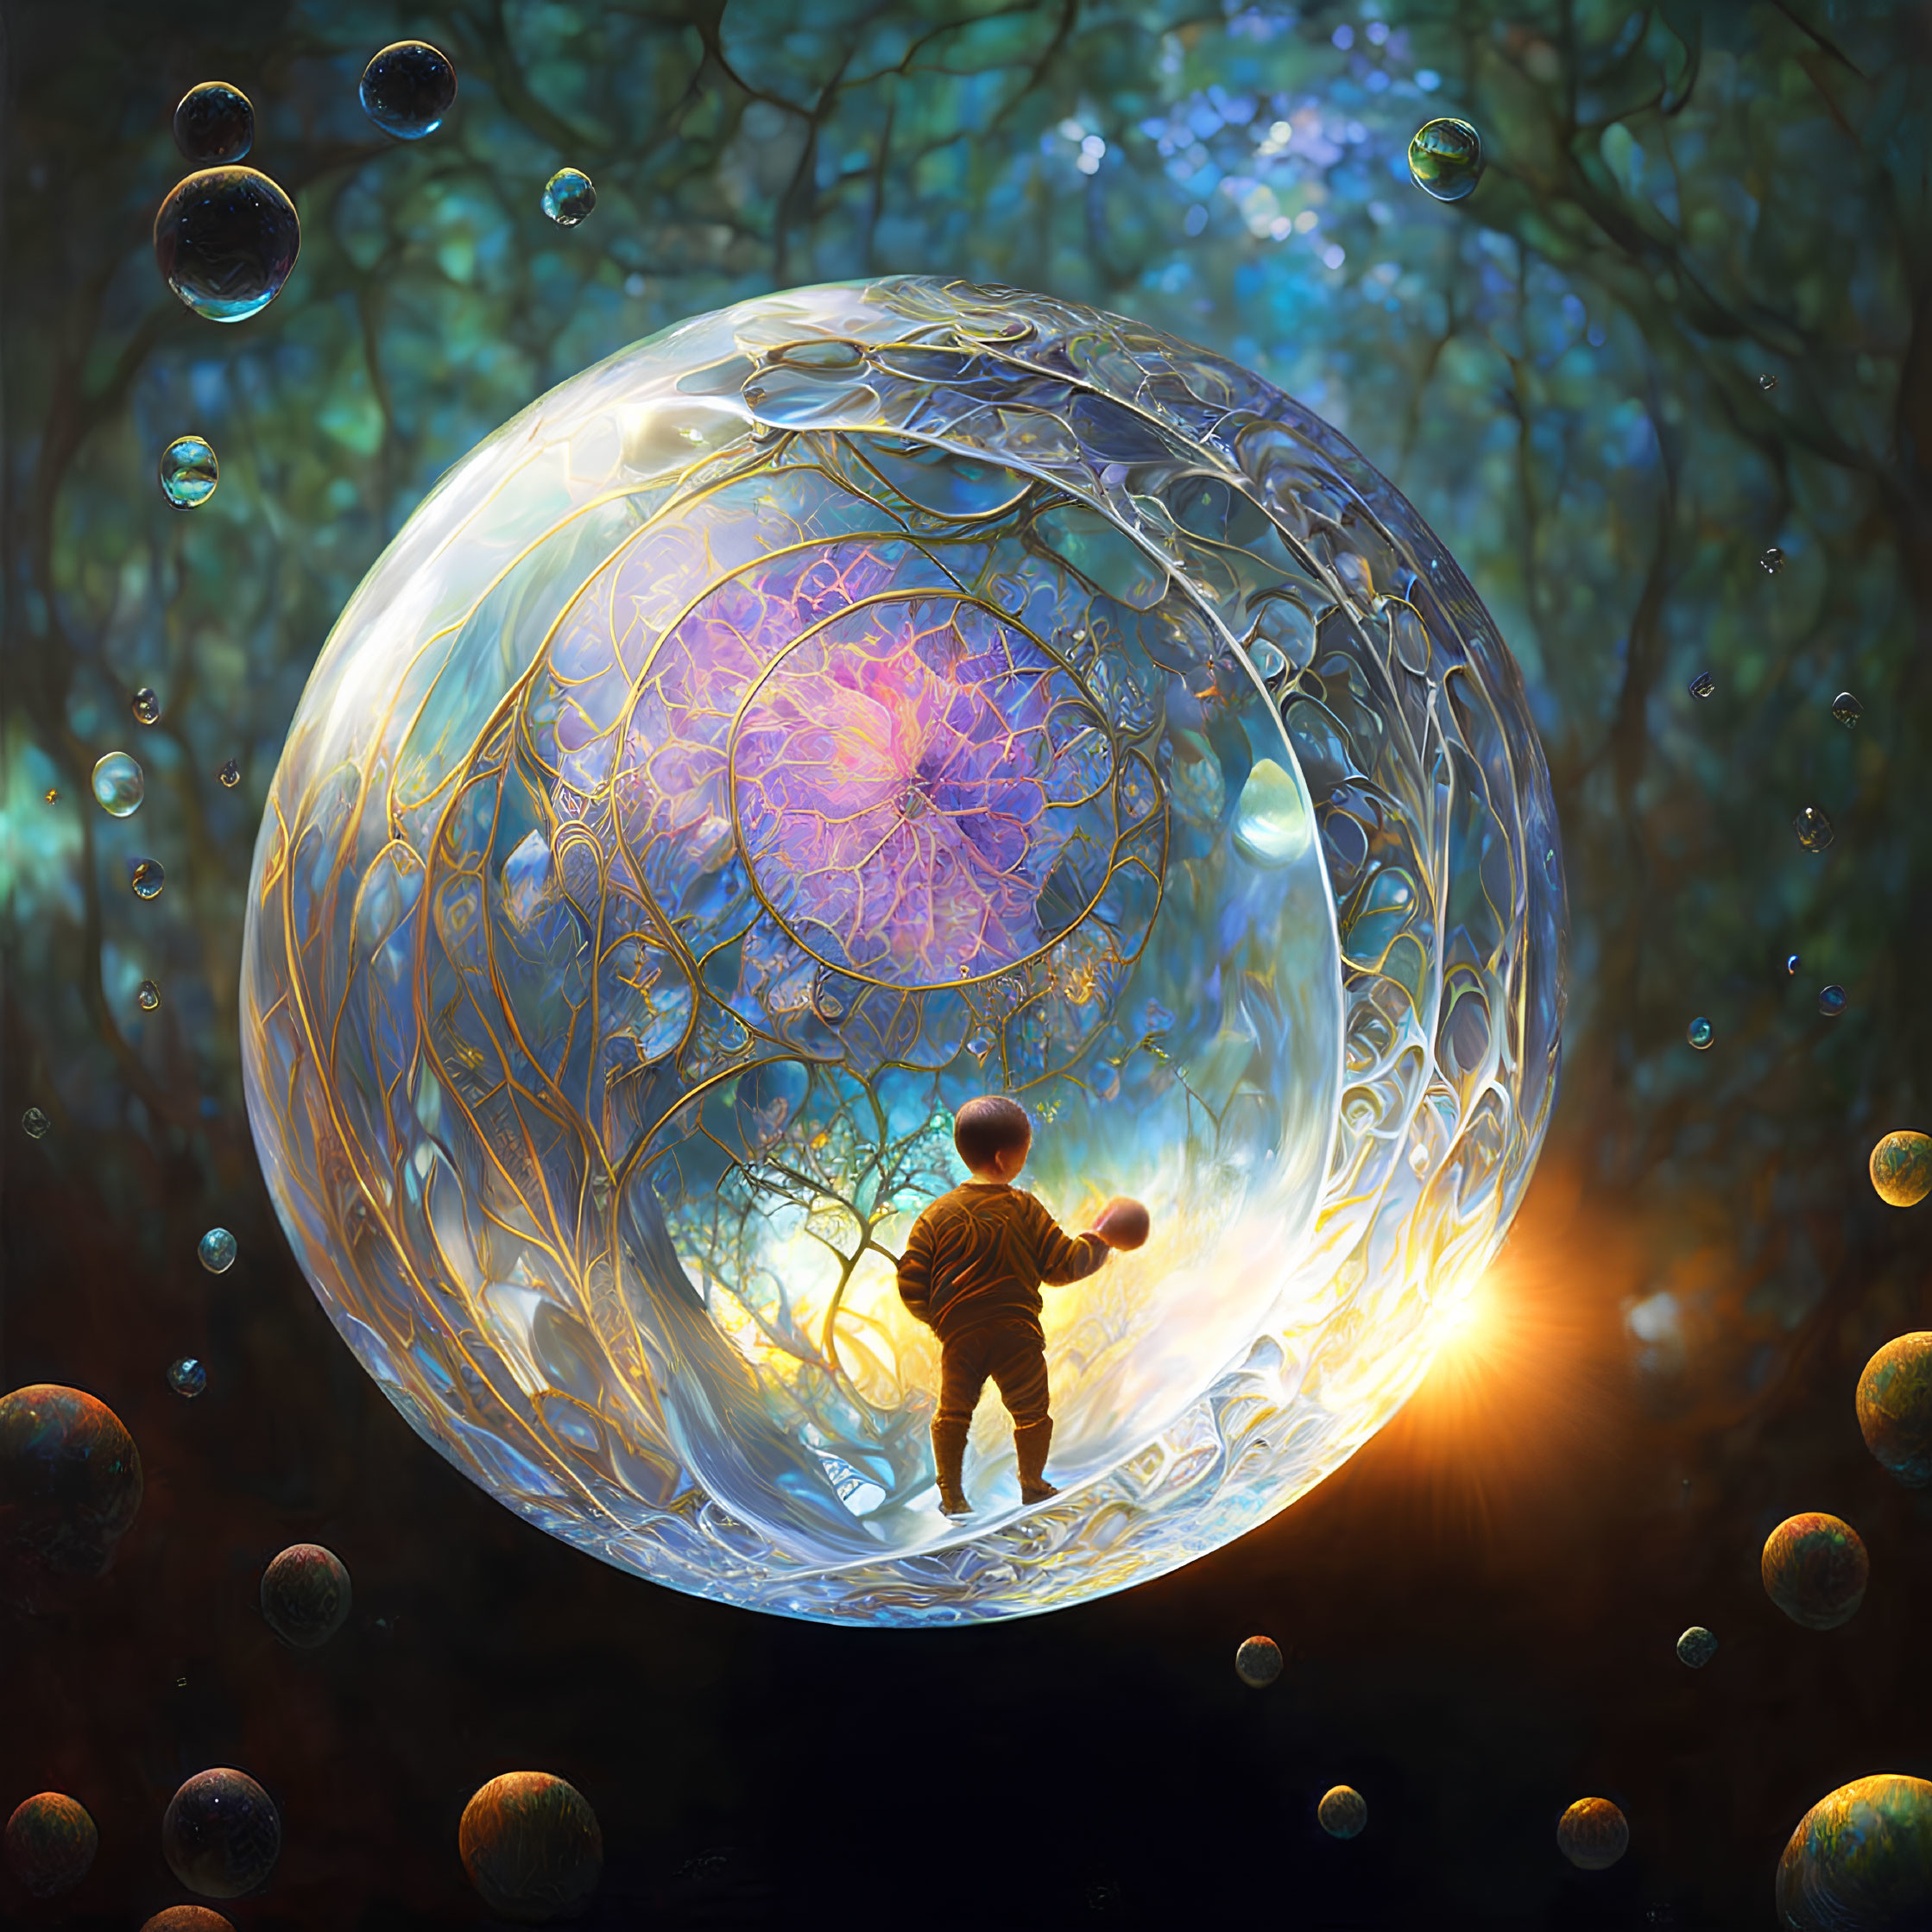 Child Reaching Out to Large Patterned Bubble in Dreamy Forest